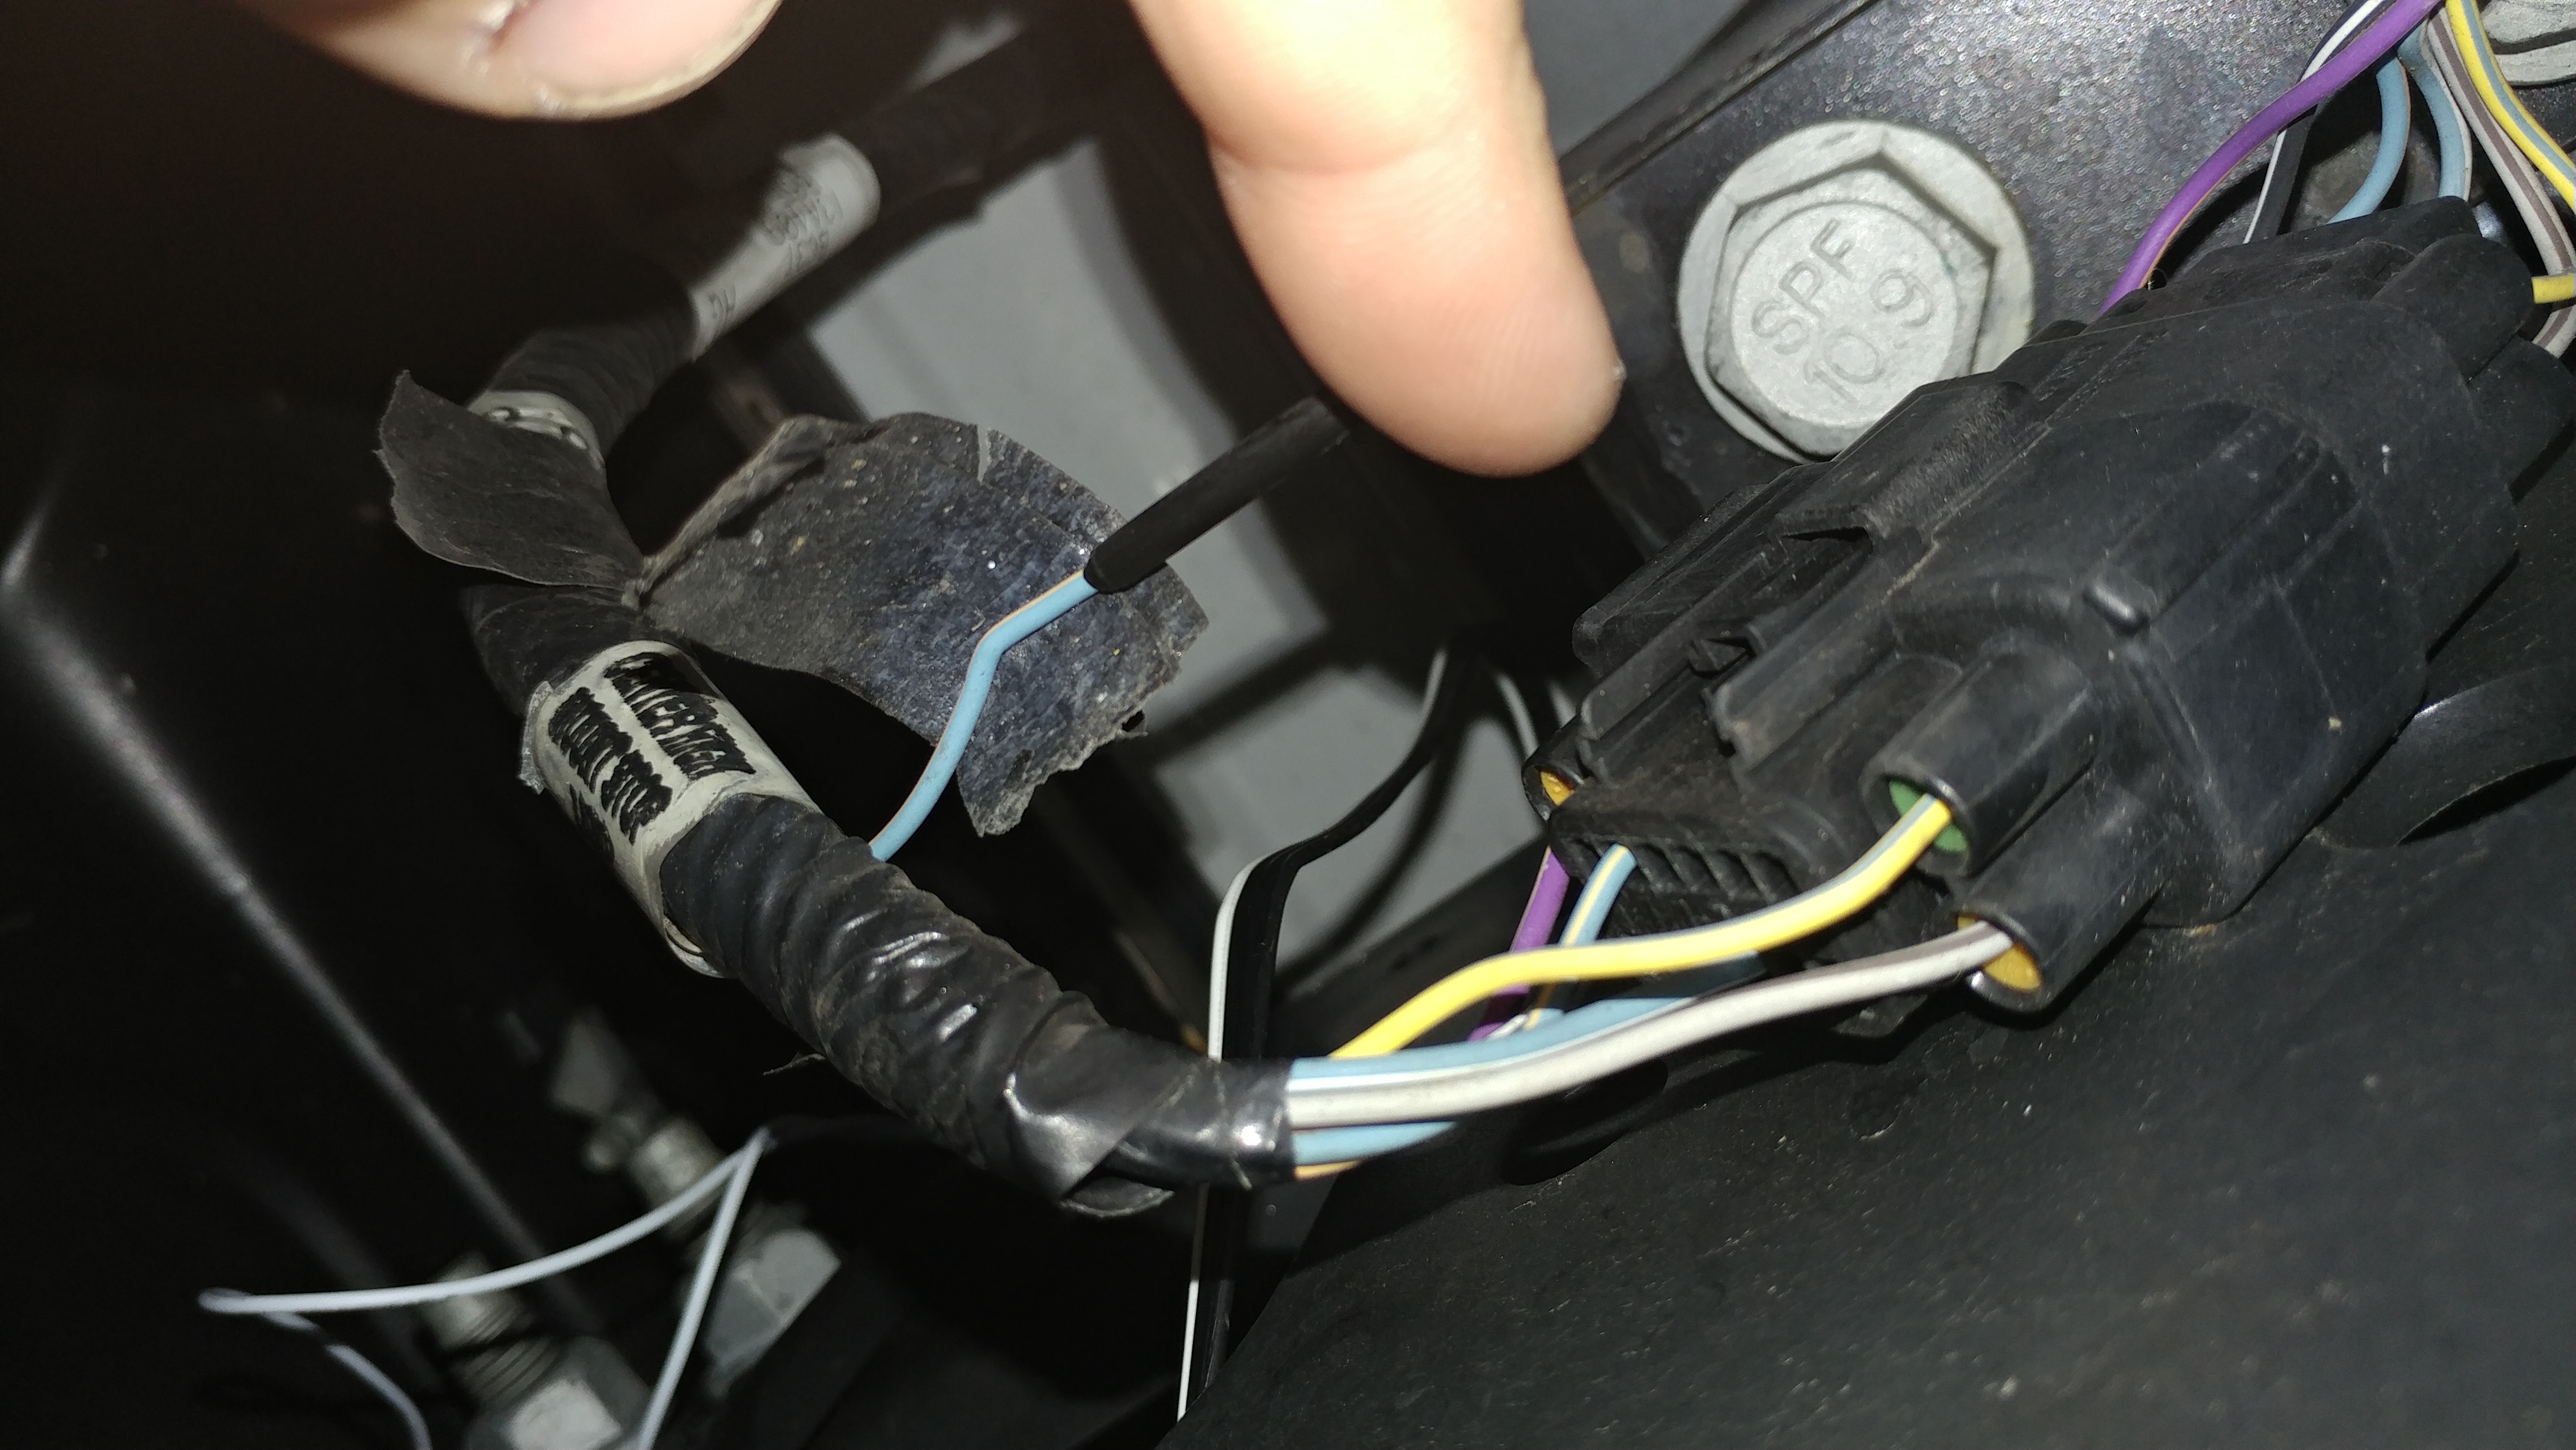 7 way wiring harness question - Ford Truck Enthusiasts Forums